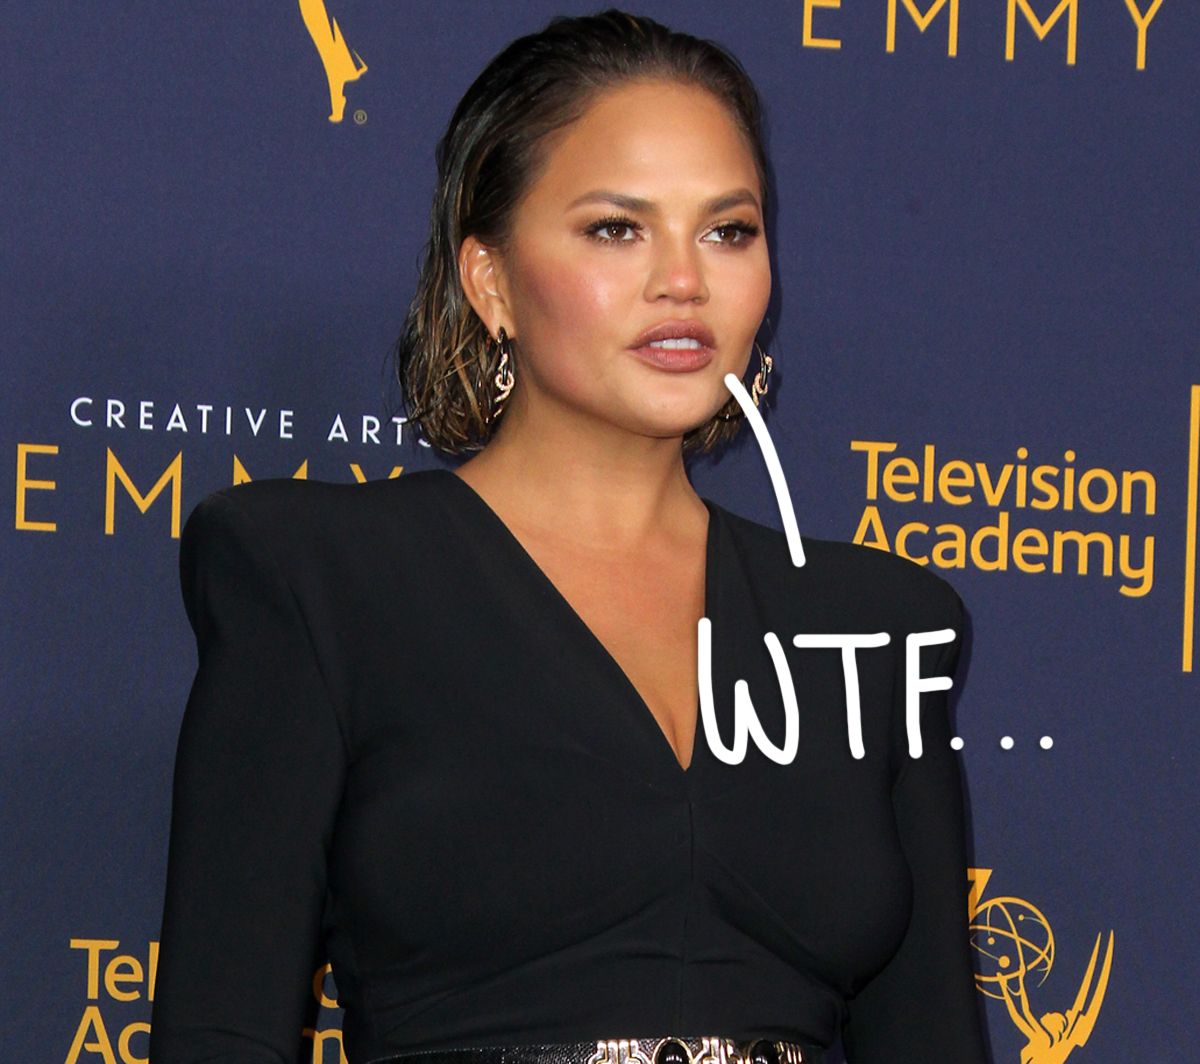 #Chrissy Teigen Reacts To Nasty Comments After Sharing Her Miscarriage Was A Life-Saving Abortion